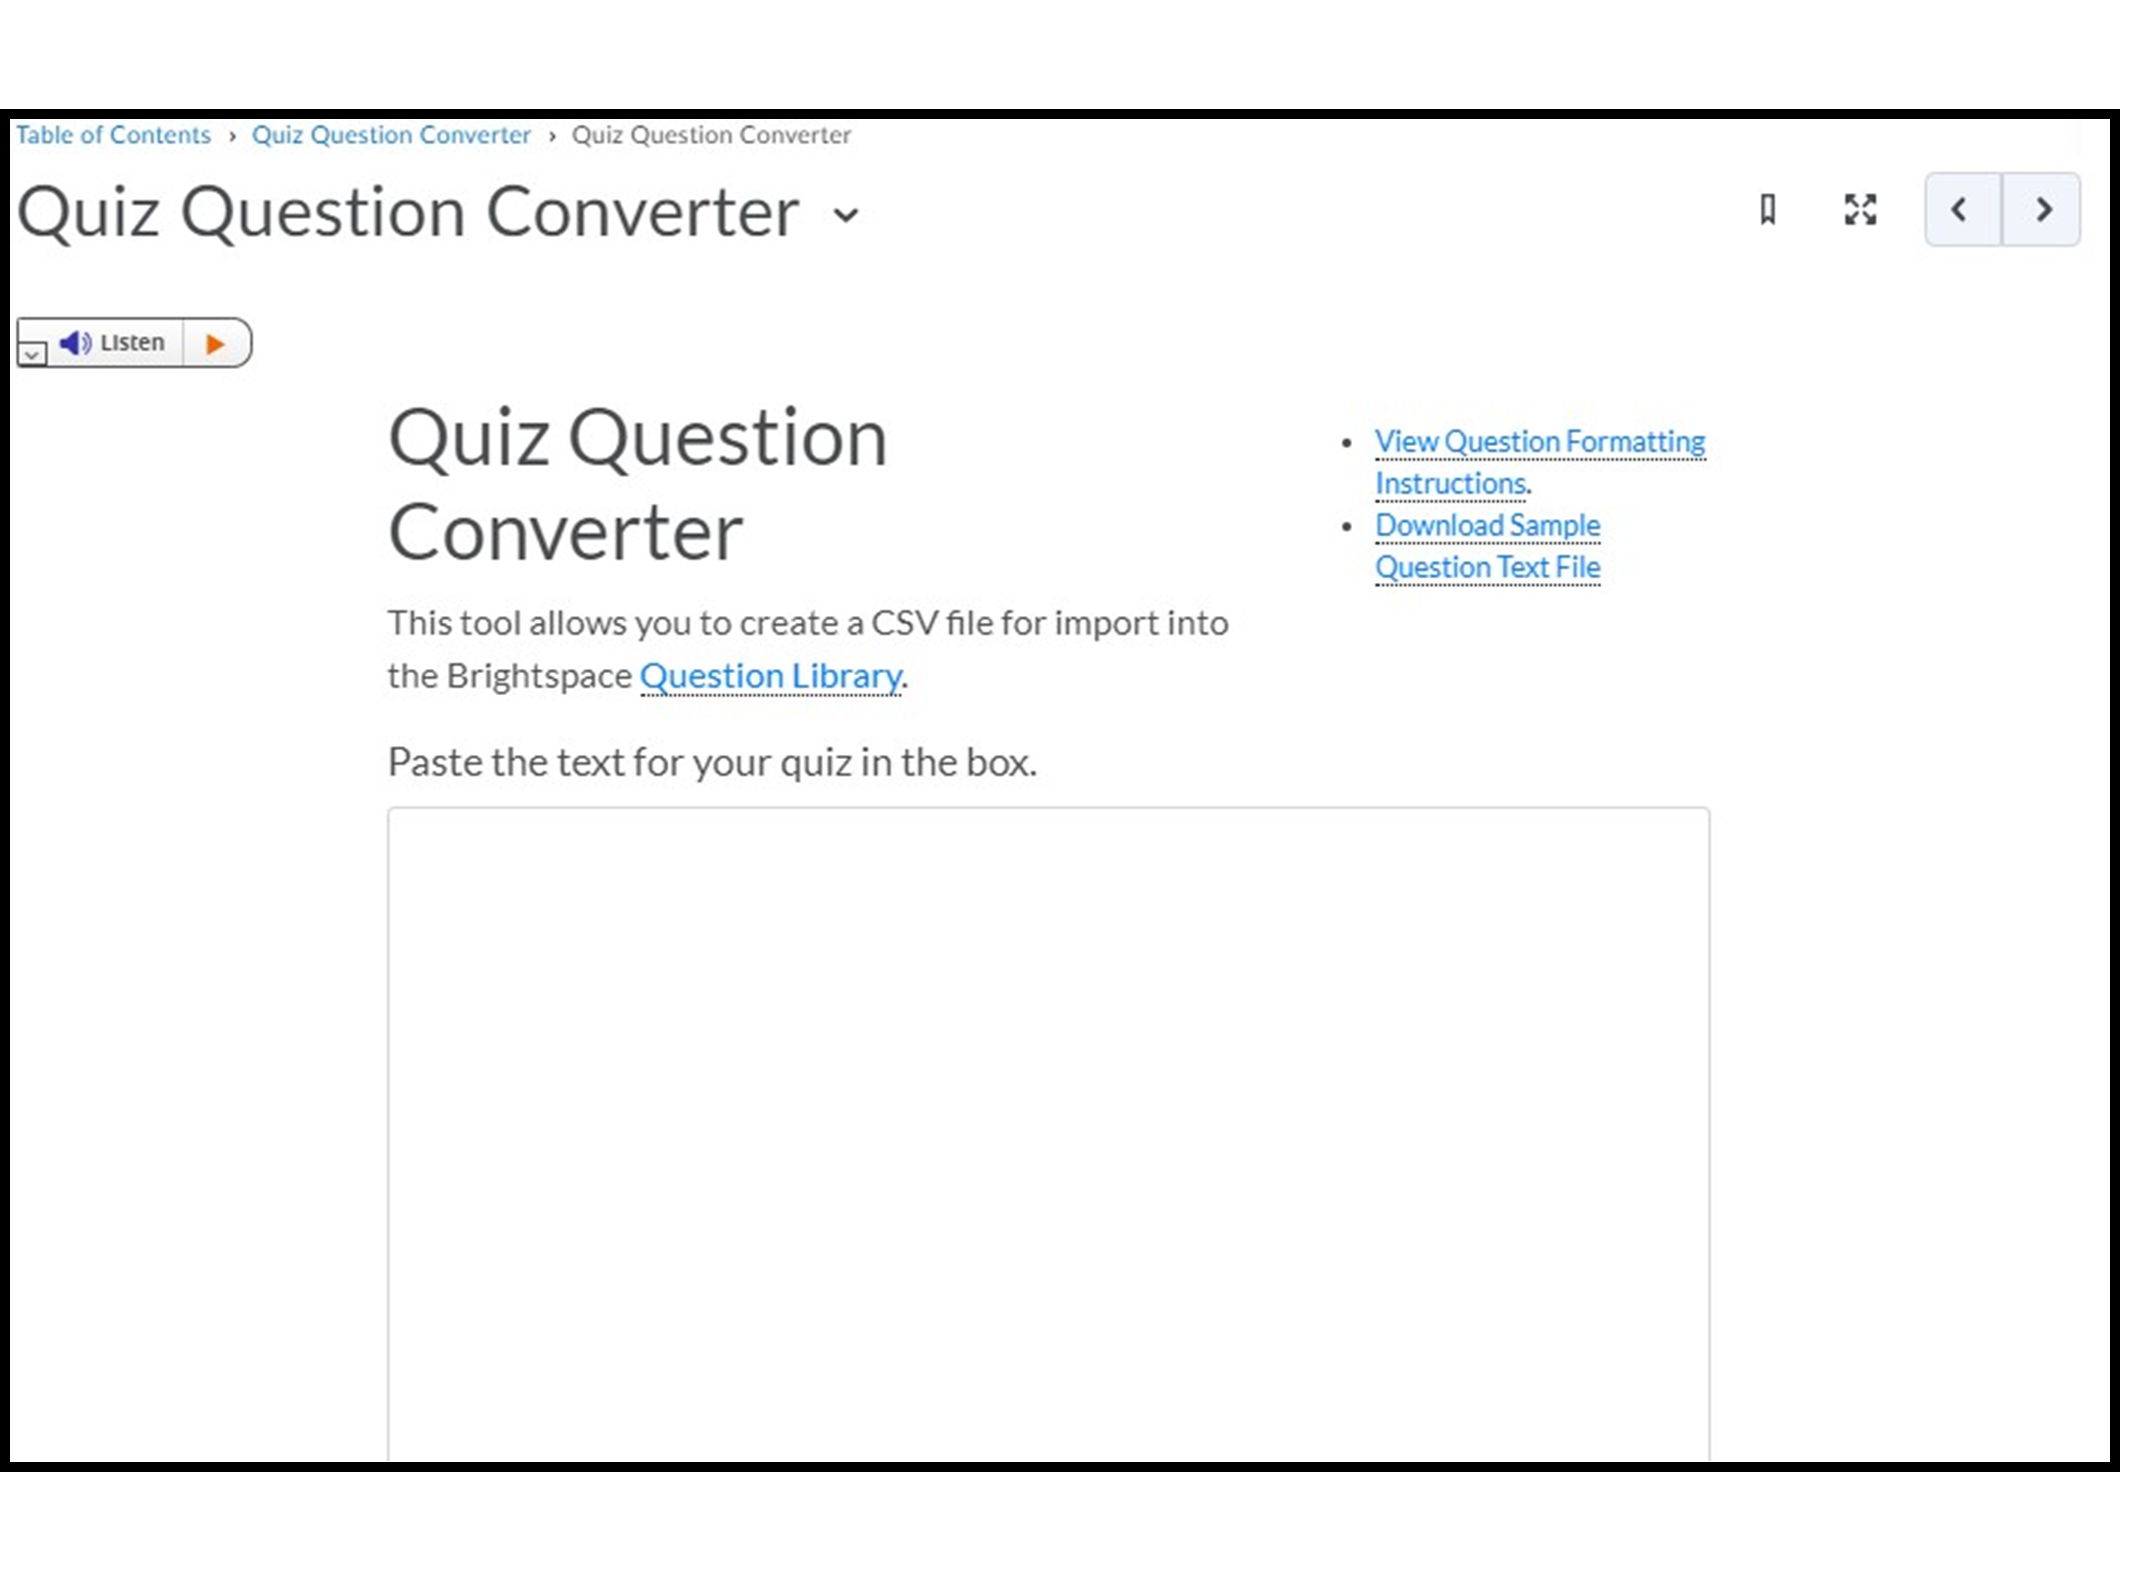 The topic link will open to an embedded tool in Brightspace, where you can copy and paste your quiz text and convert the file to a CSV. An option to listen is located in the top left corner.